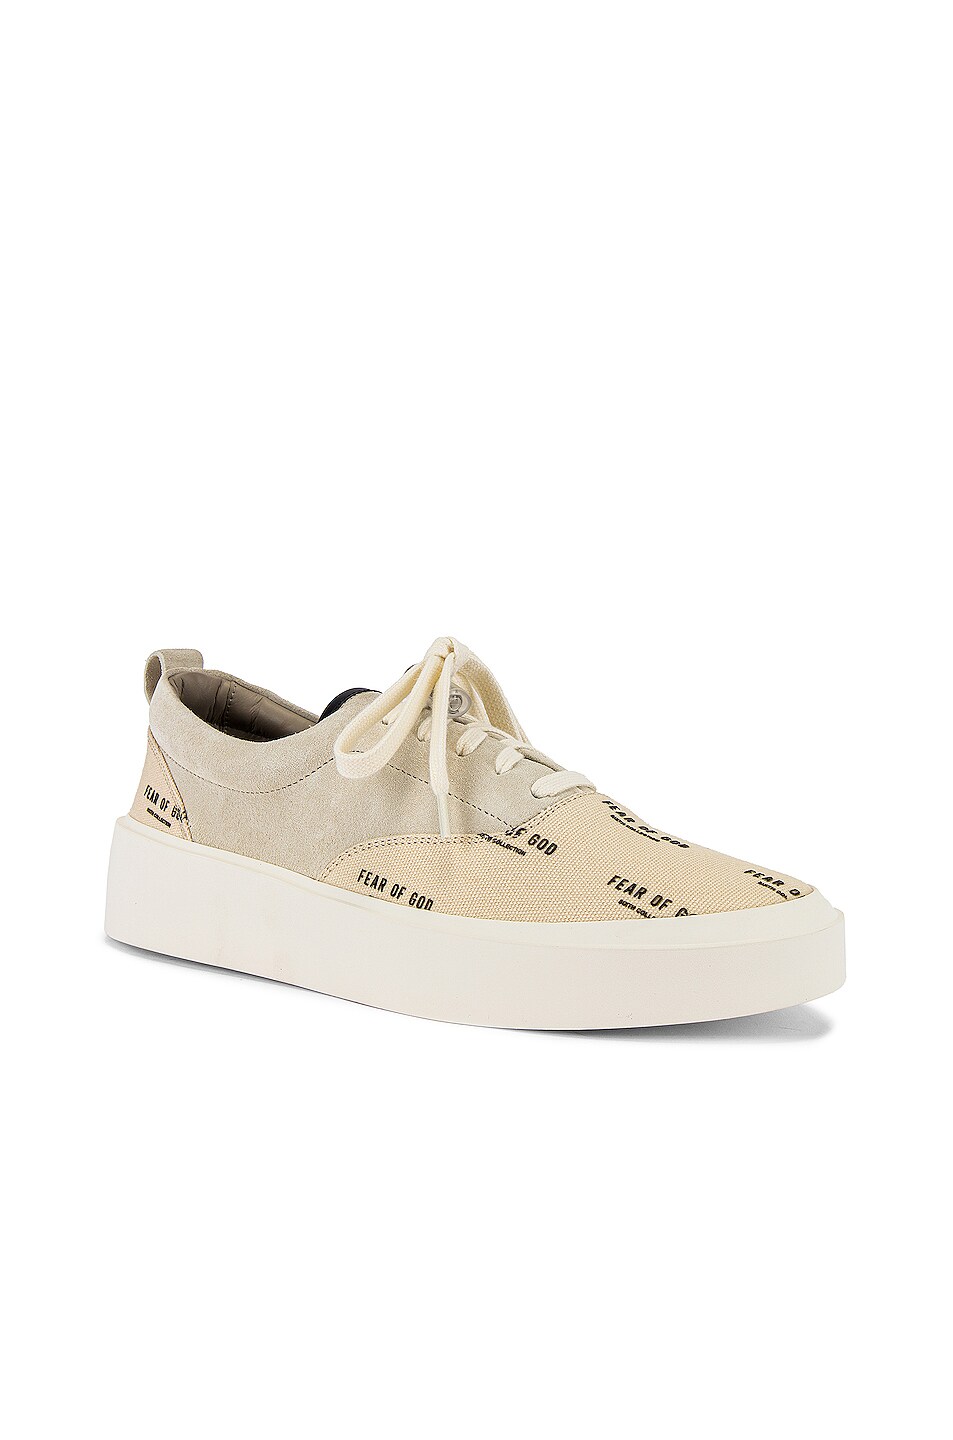 Image 1 of Fear of God 101 Lace Up Sneaker in Bone & Cream Fear of God Print